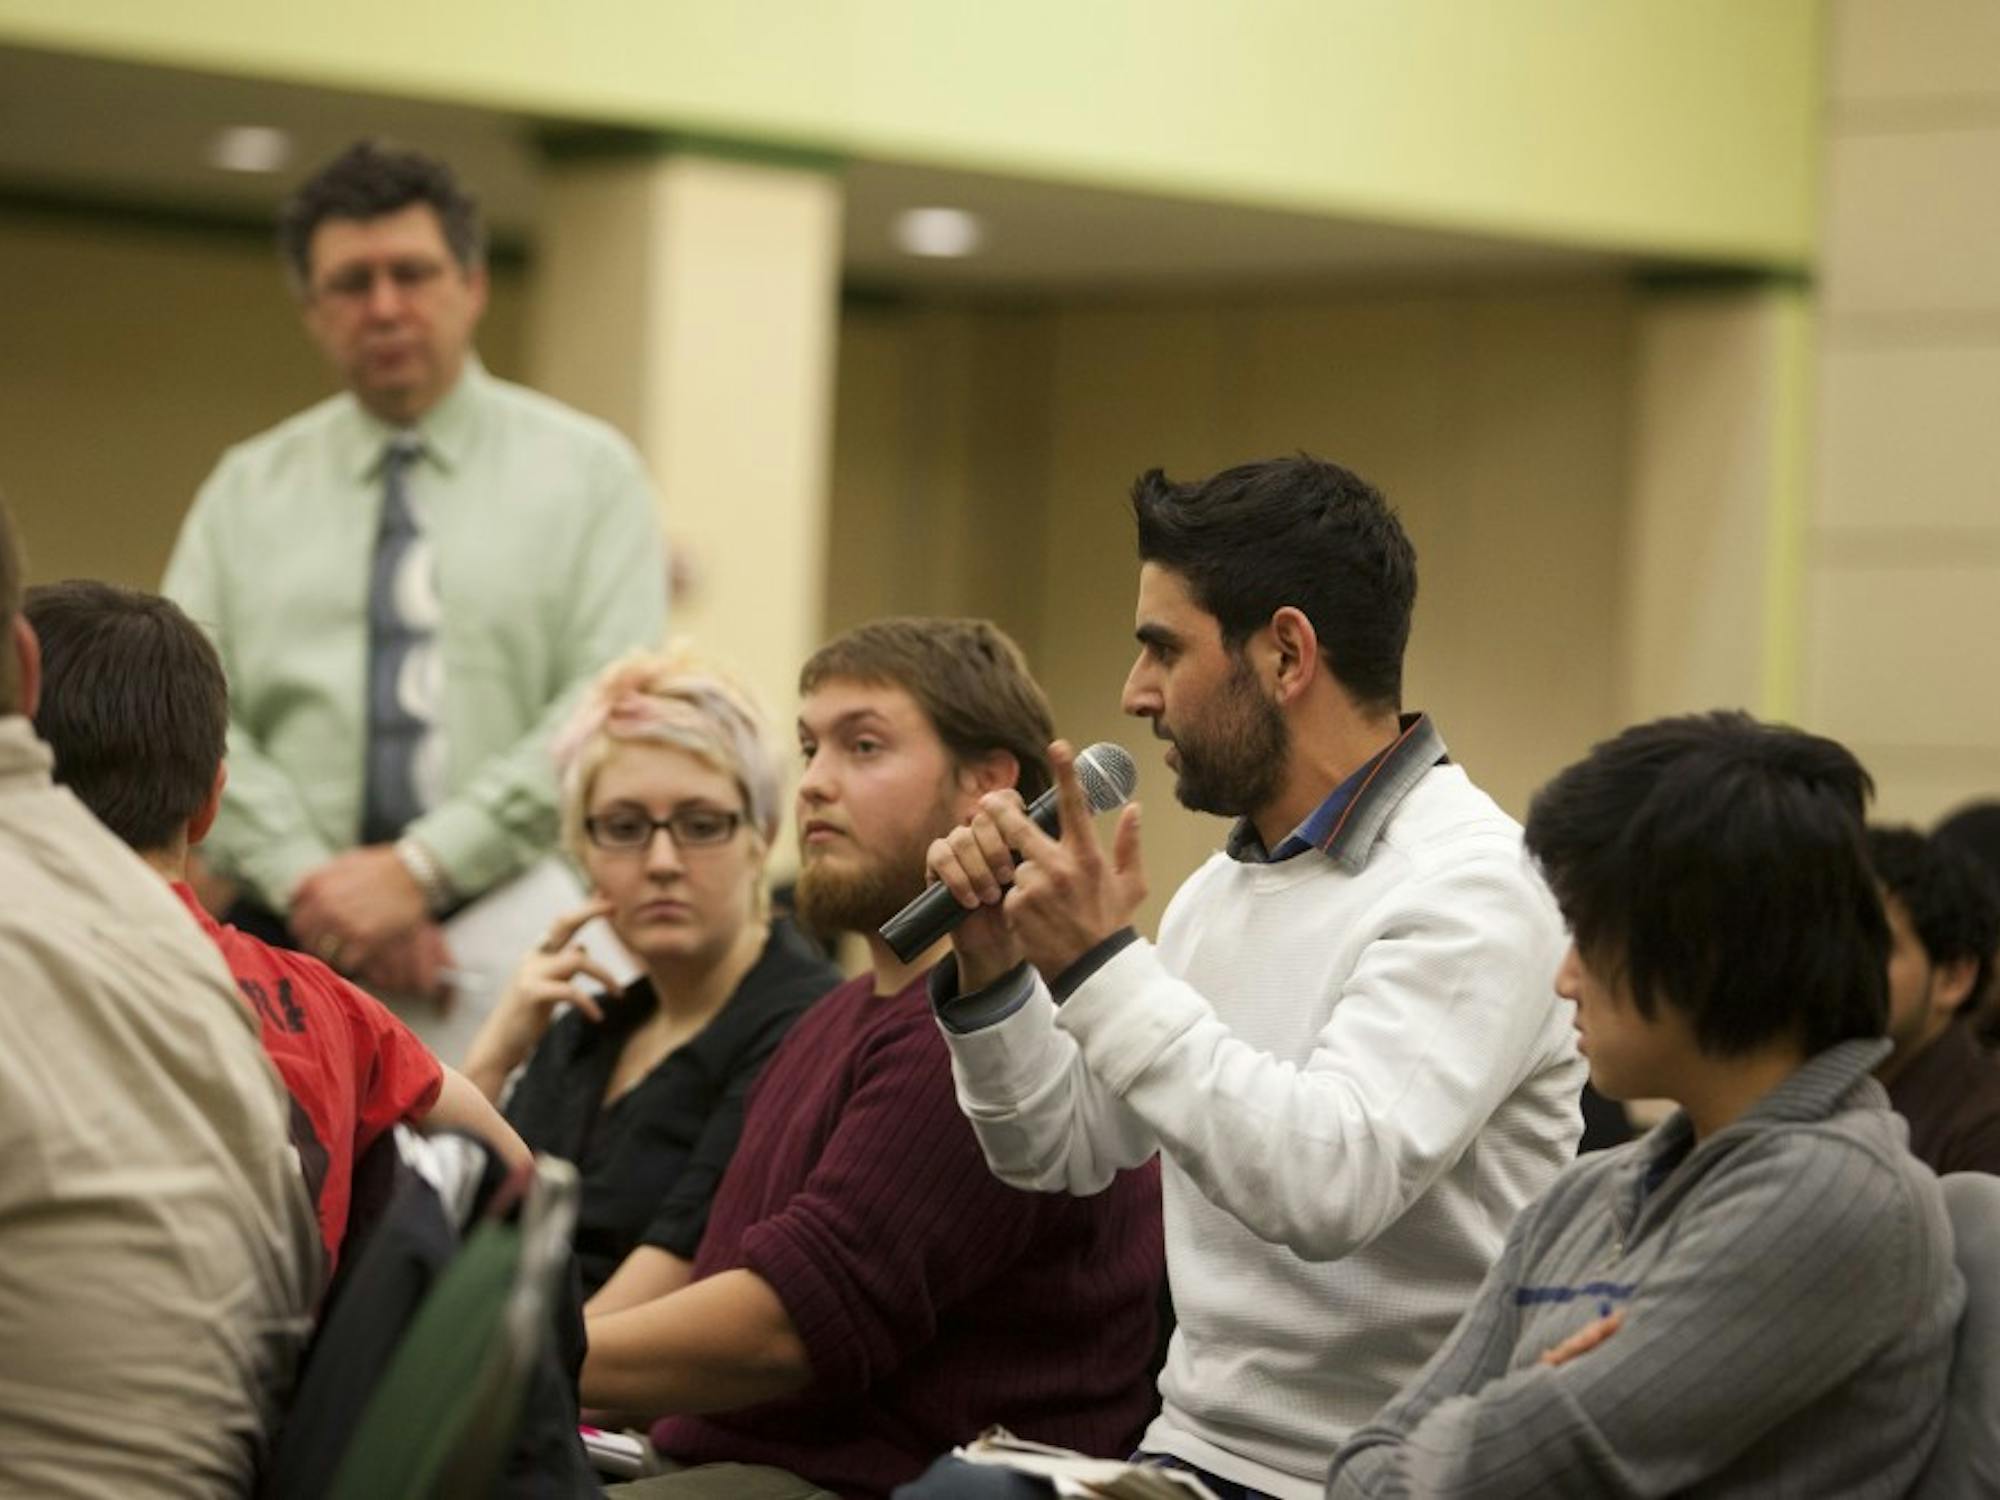 Malek Abduljaber comments on the revolution in Egypt. The ‘teach-in’ on Thursday was held to help educate the campus community on the conflicts arising in the Middle East.